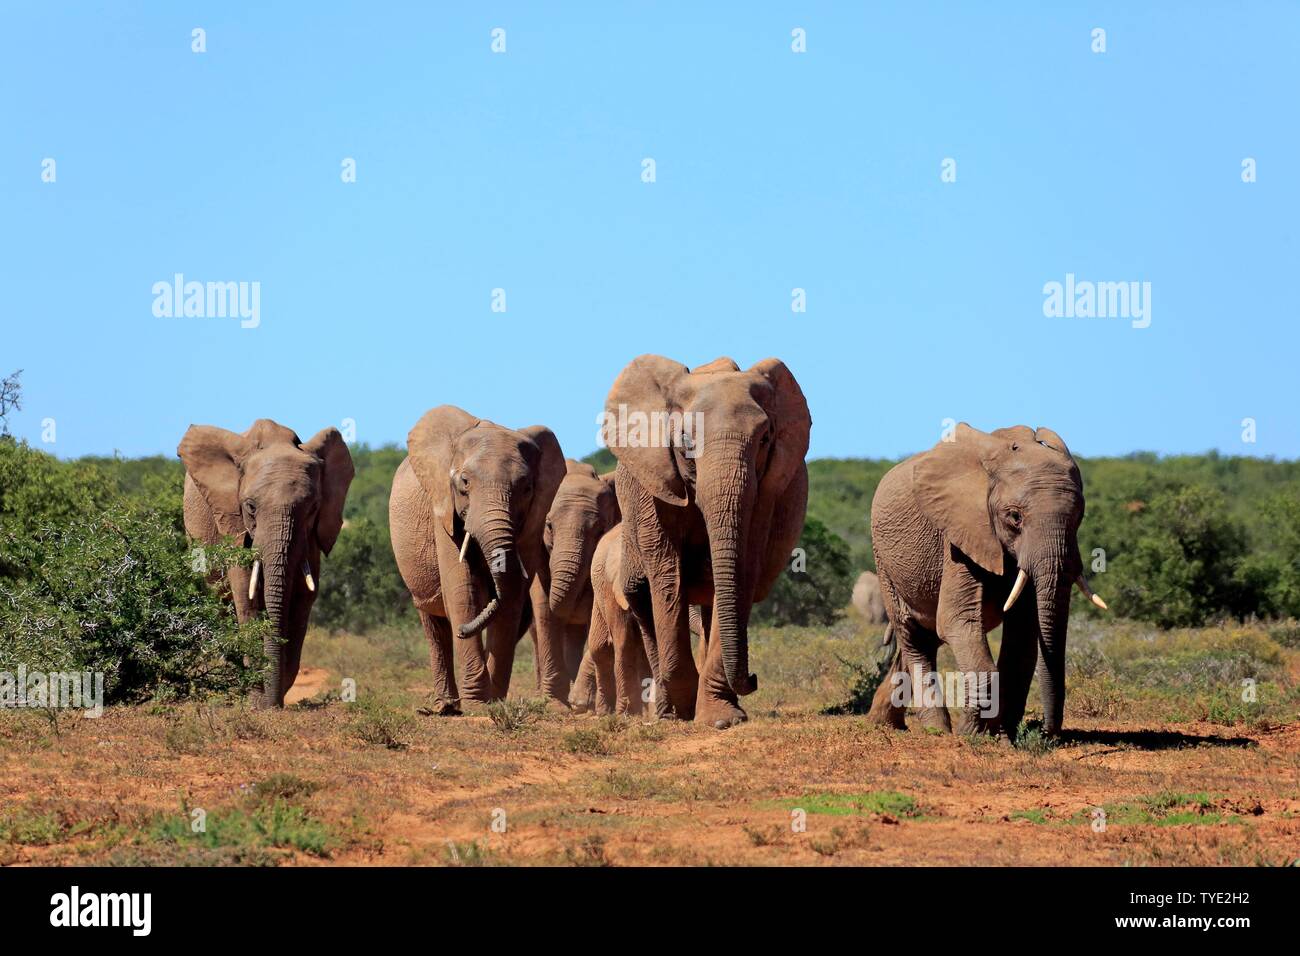 African elephants (Loxodonta africana), herd with young animals walking, Addo Elephant National Park, Eastern Cape, South Africa Stock Photo